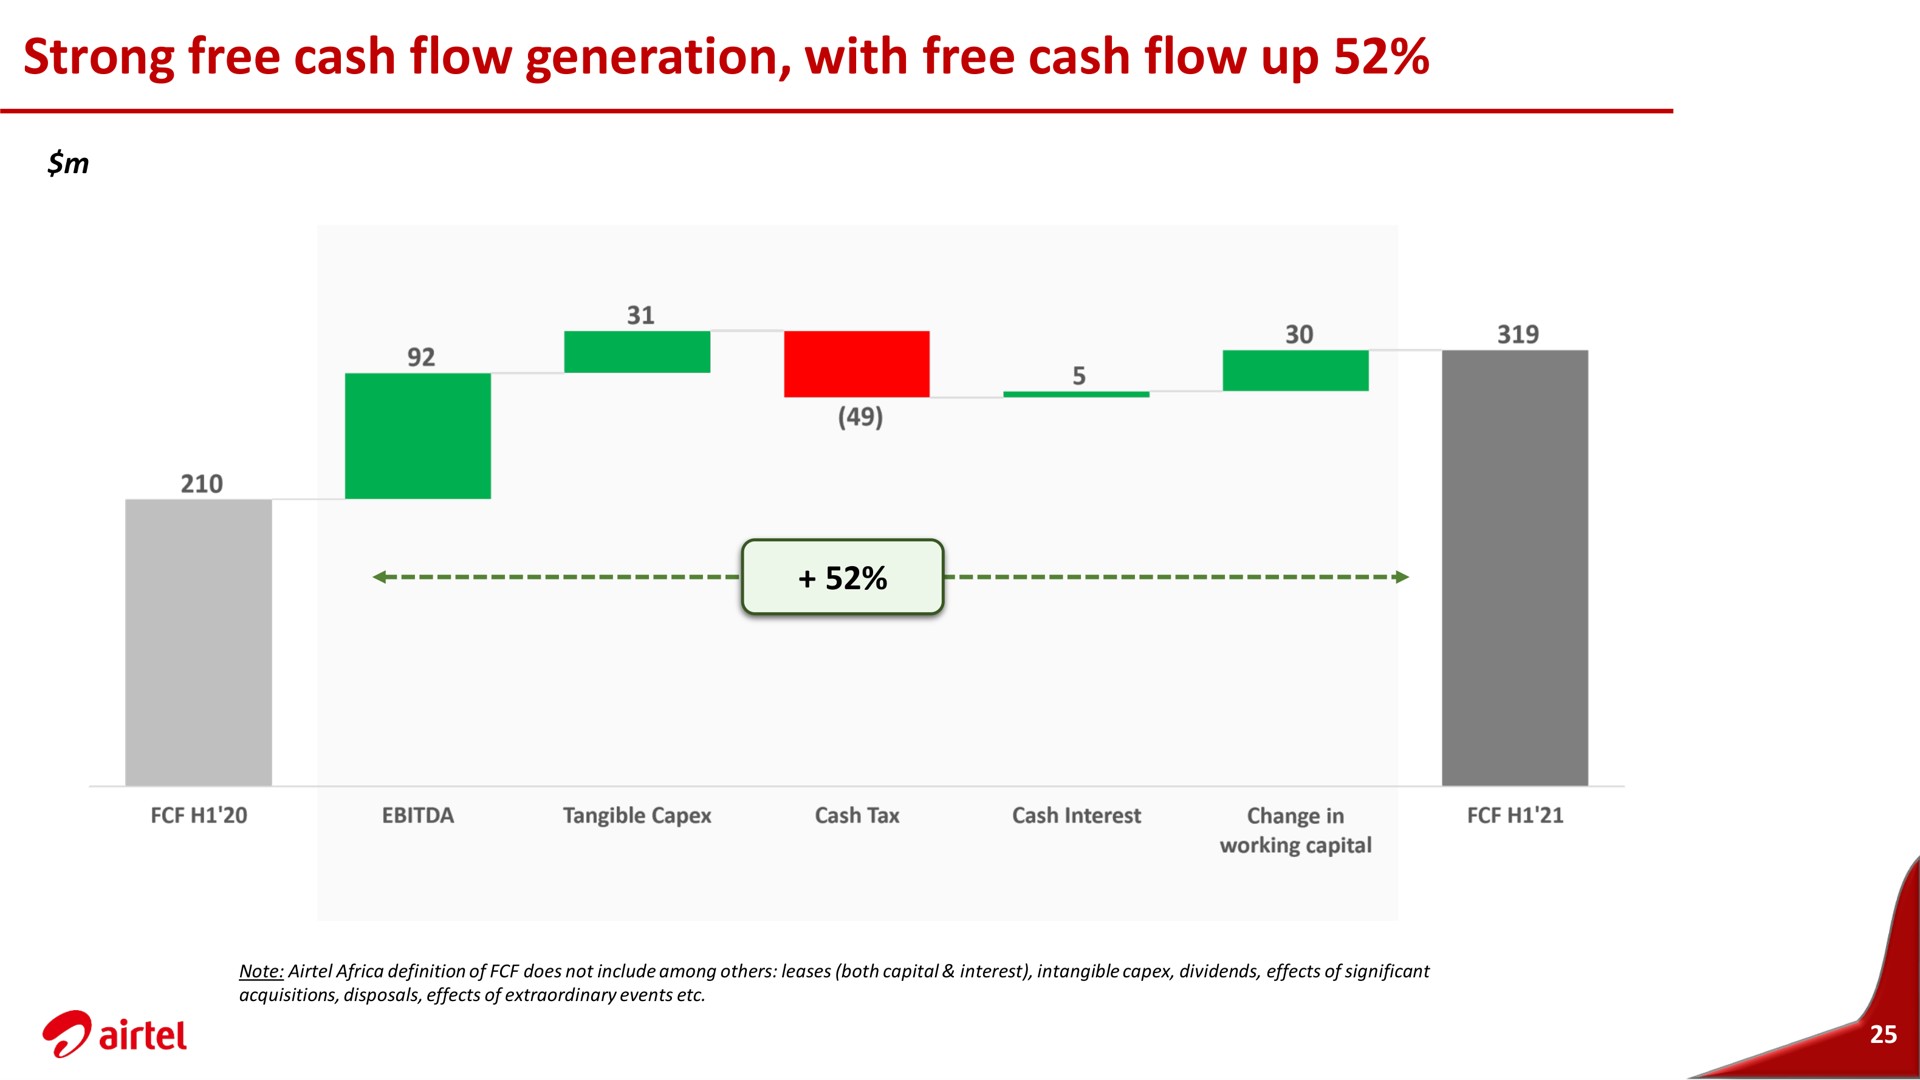 strong free cash flow generation with free cash flow up | Airtel Africa